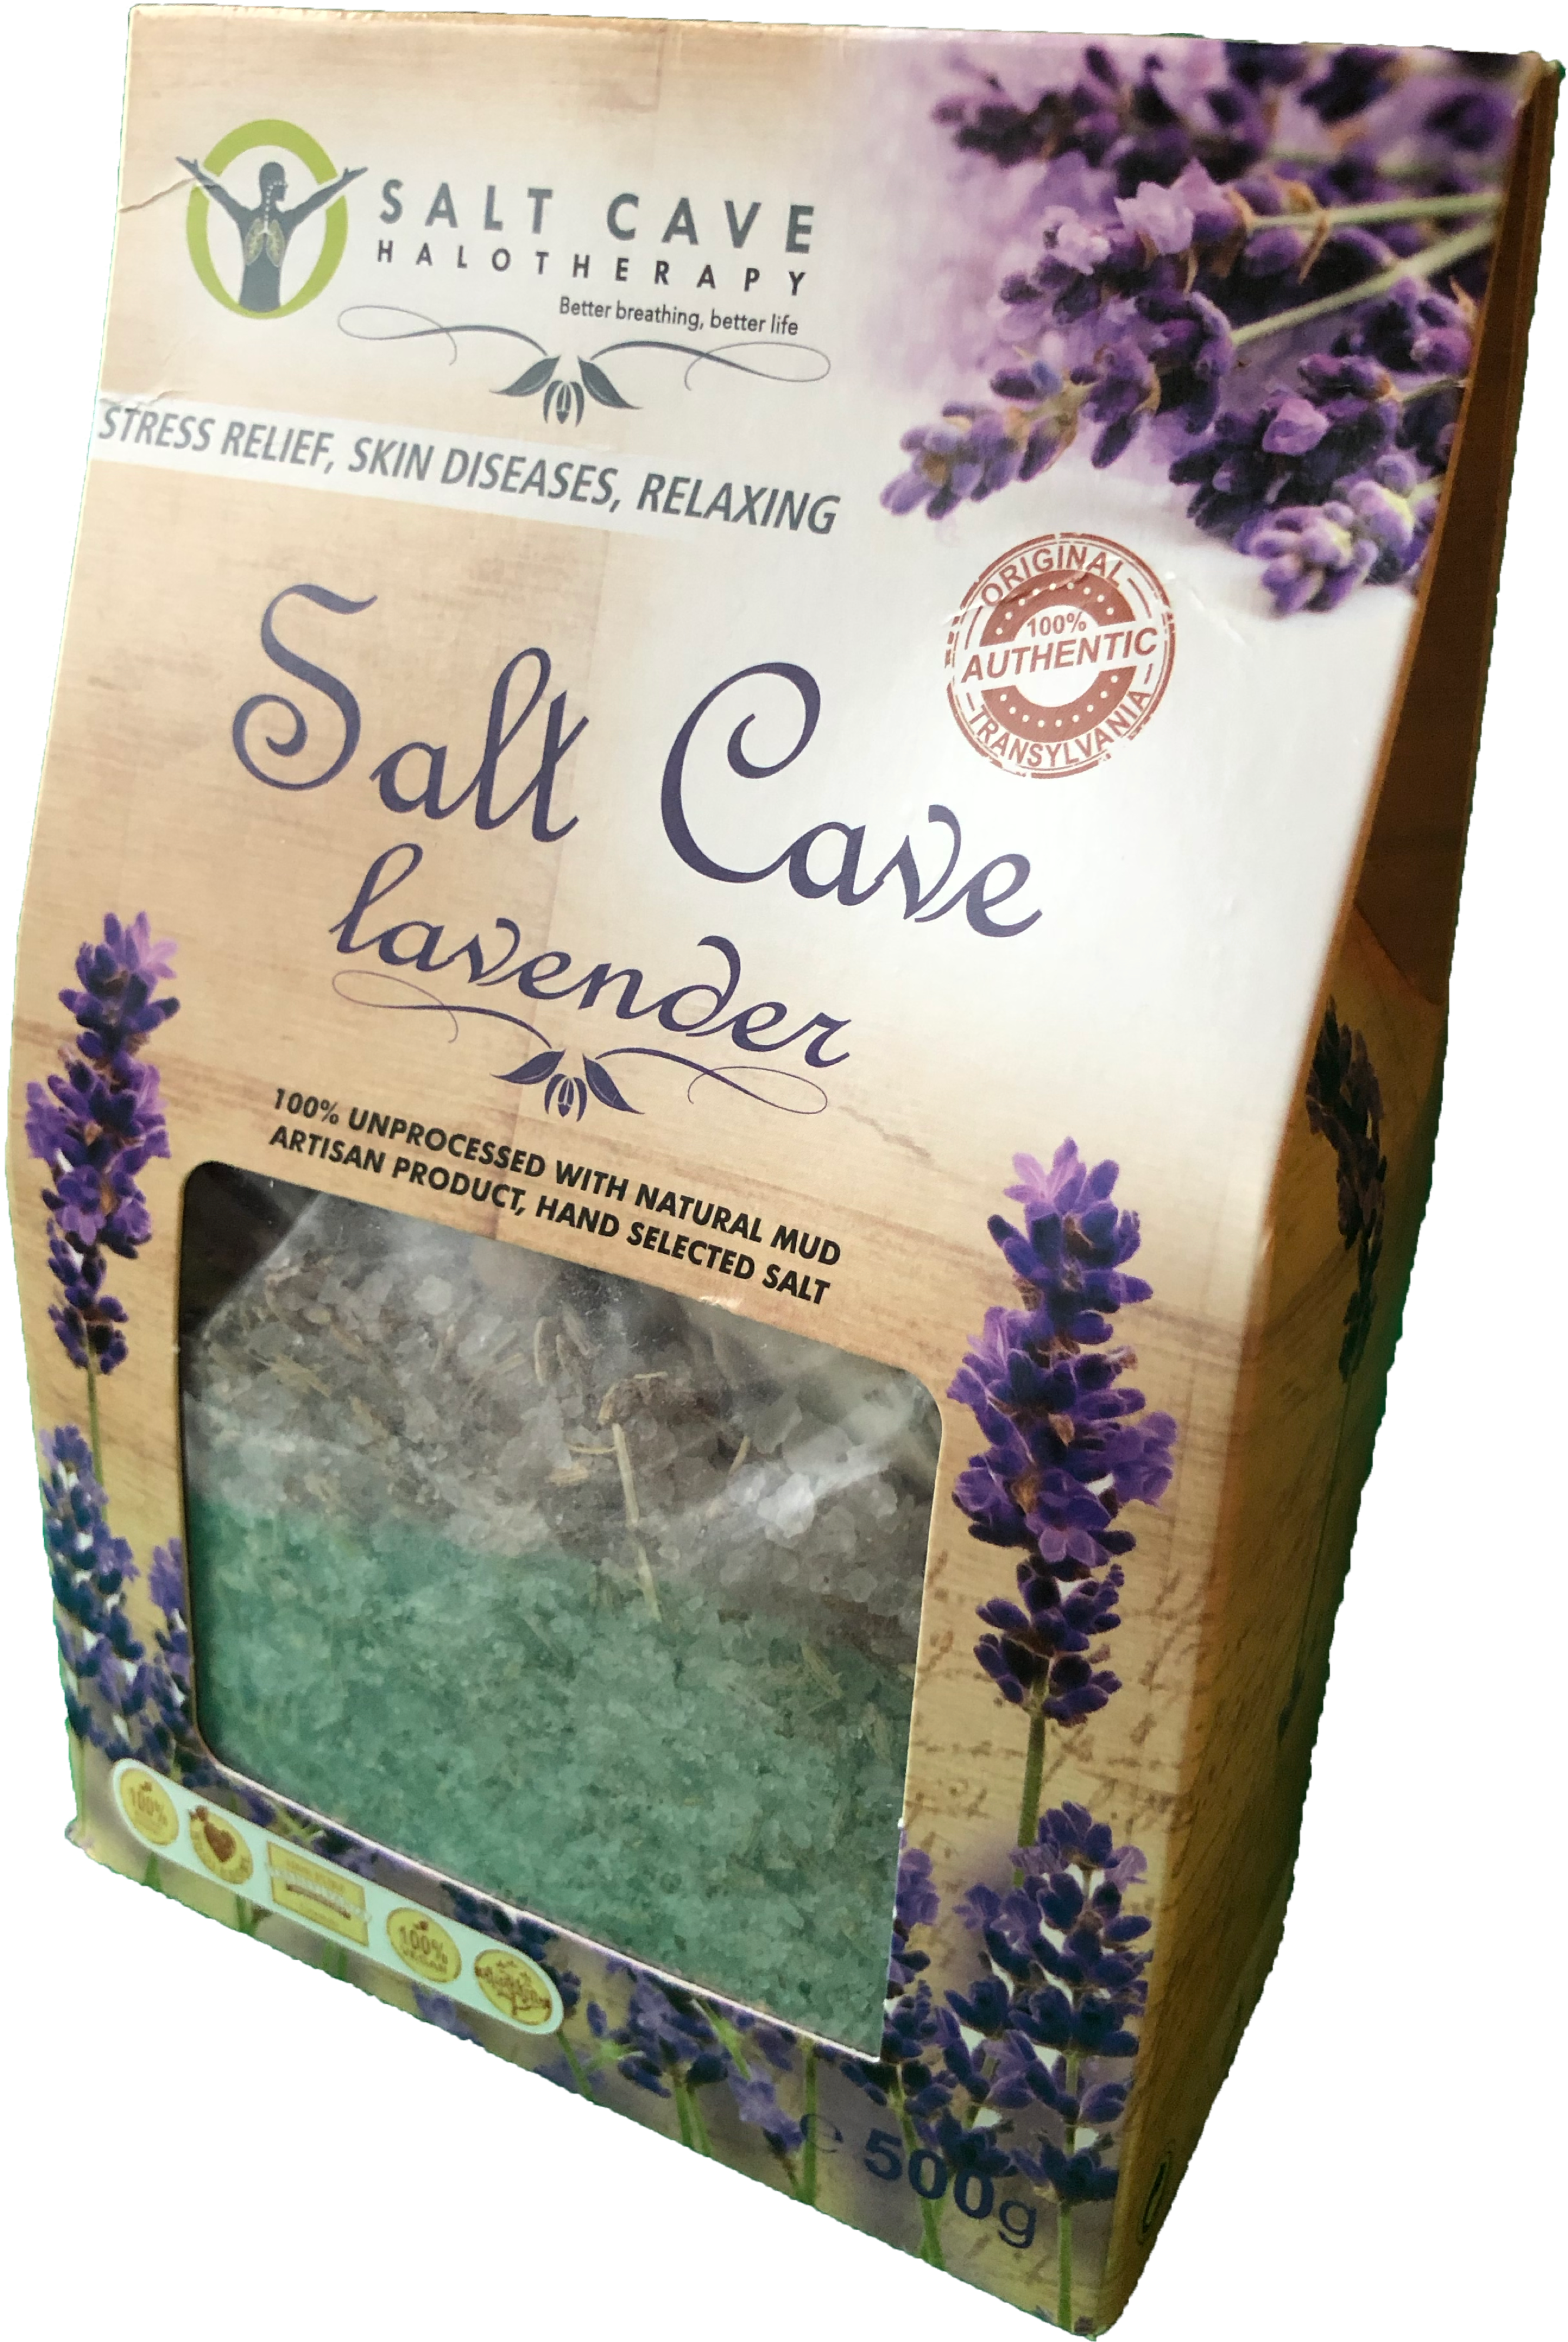 Salt Cave Lavender Therapy Product500g